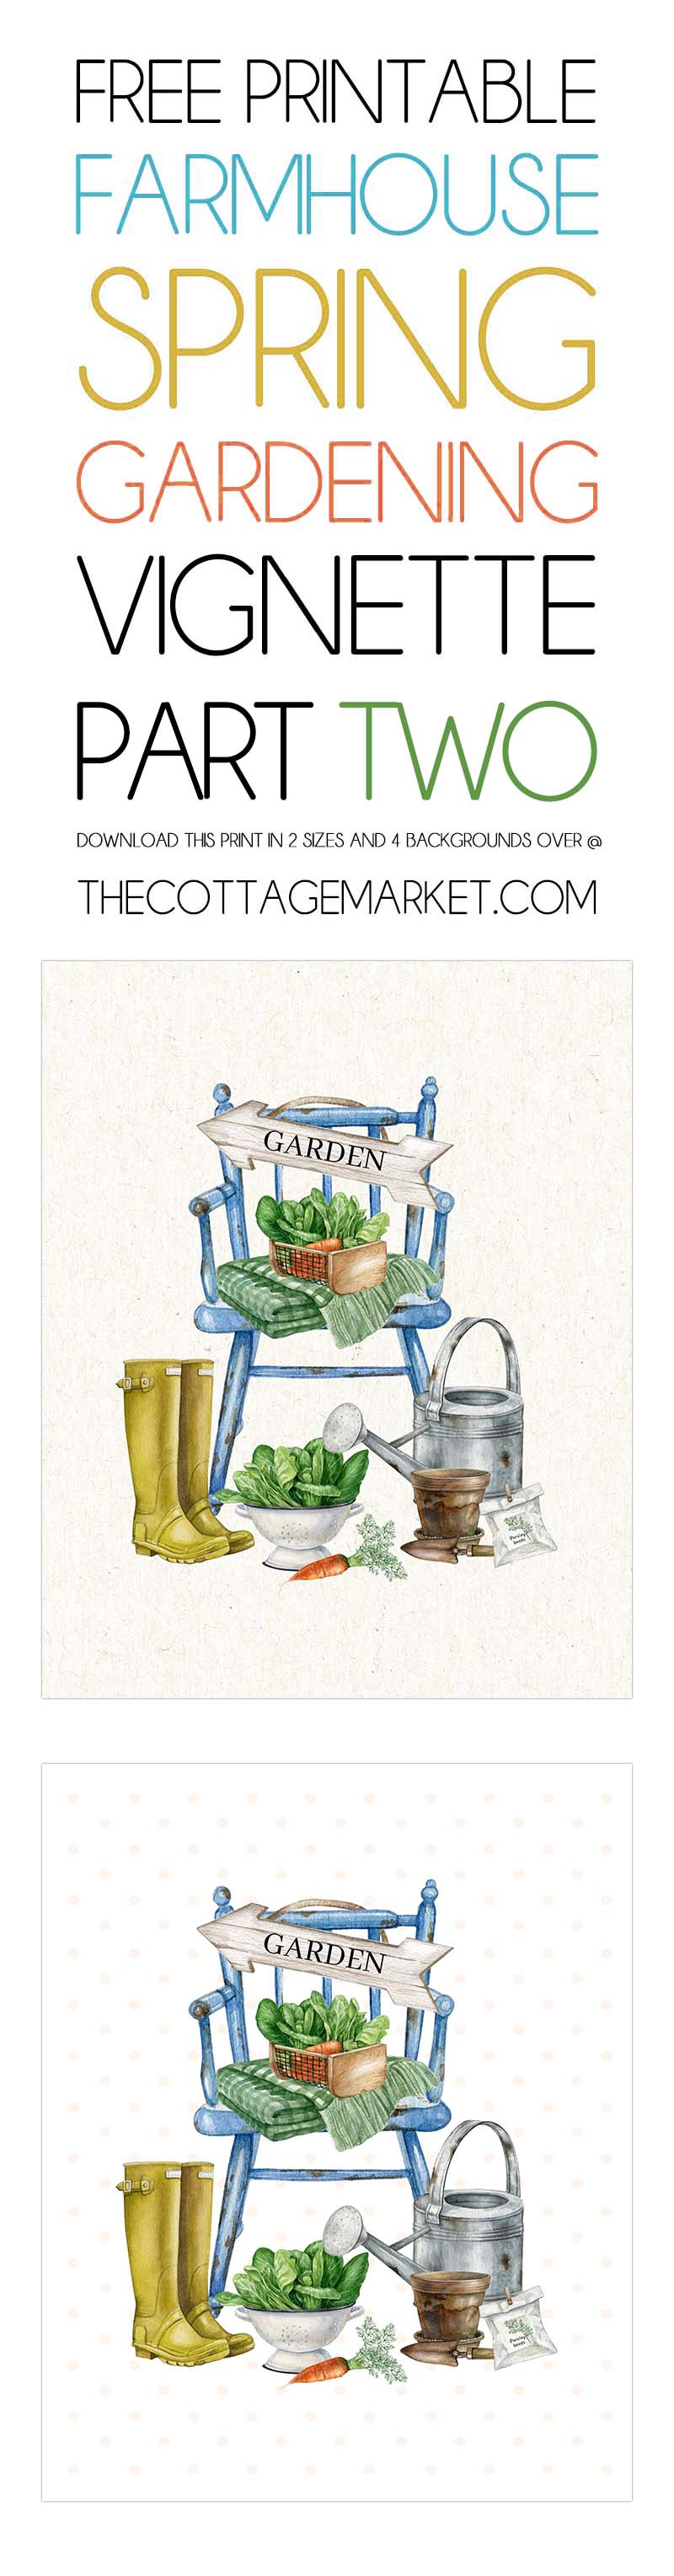 This Free Printable Farmhouse Spring Gardening Vignette Part 2 will add a touch of Freshness and Nature to your space!